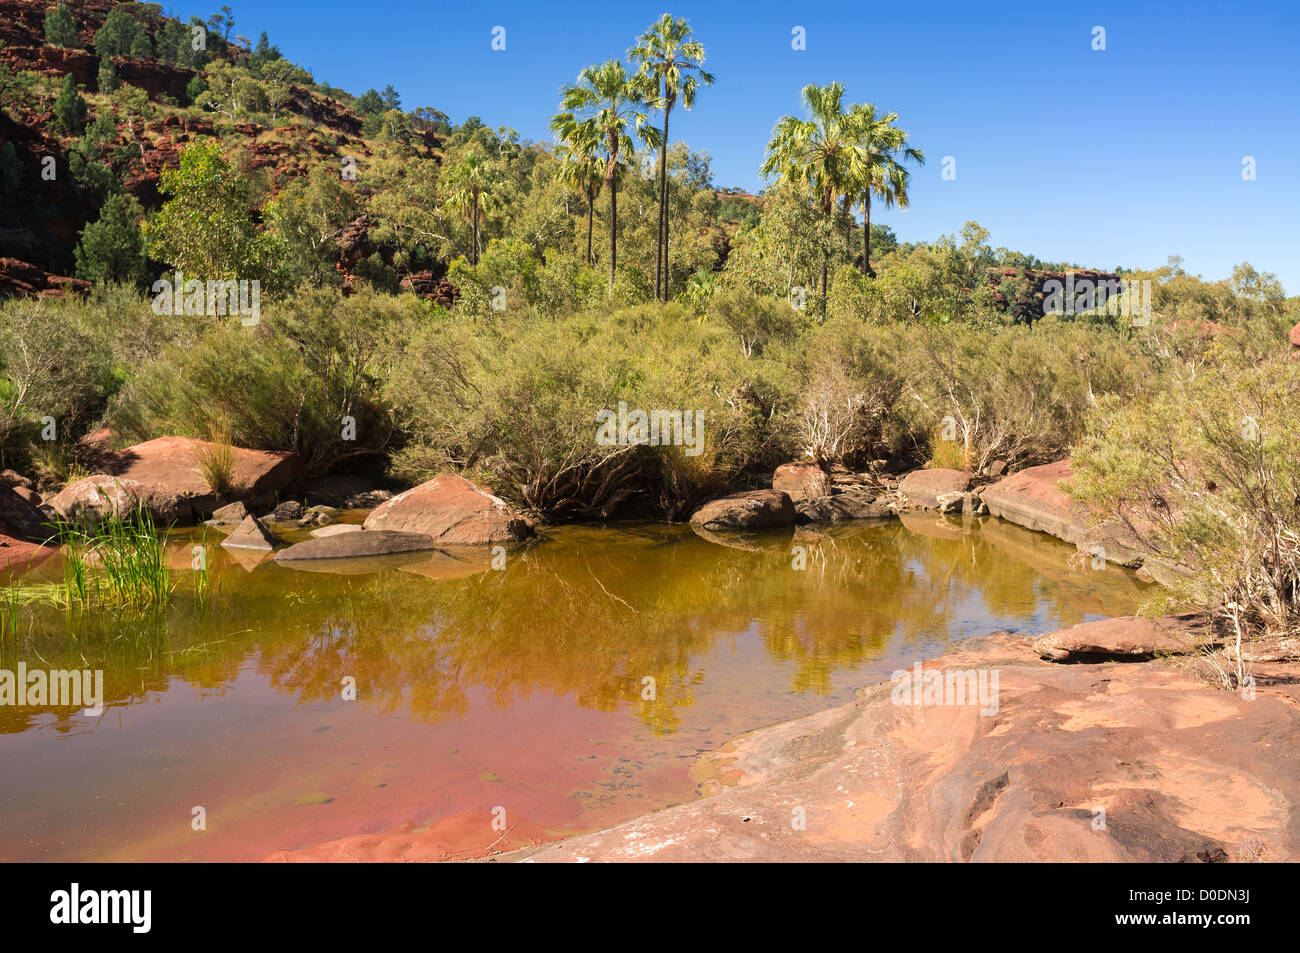 Red Cabbage Palms (Livistona Mariae) in Palm Valley, Finke Gorge National Park, south west of Alice Springs, Northern Territory, outback Australia Stock Photo